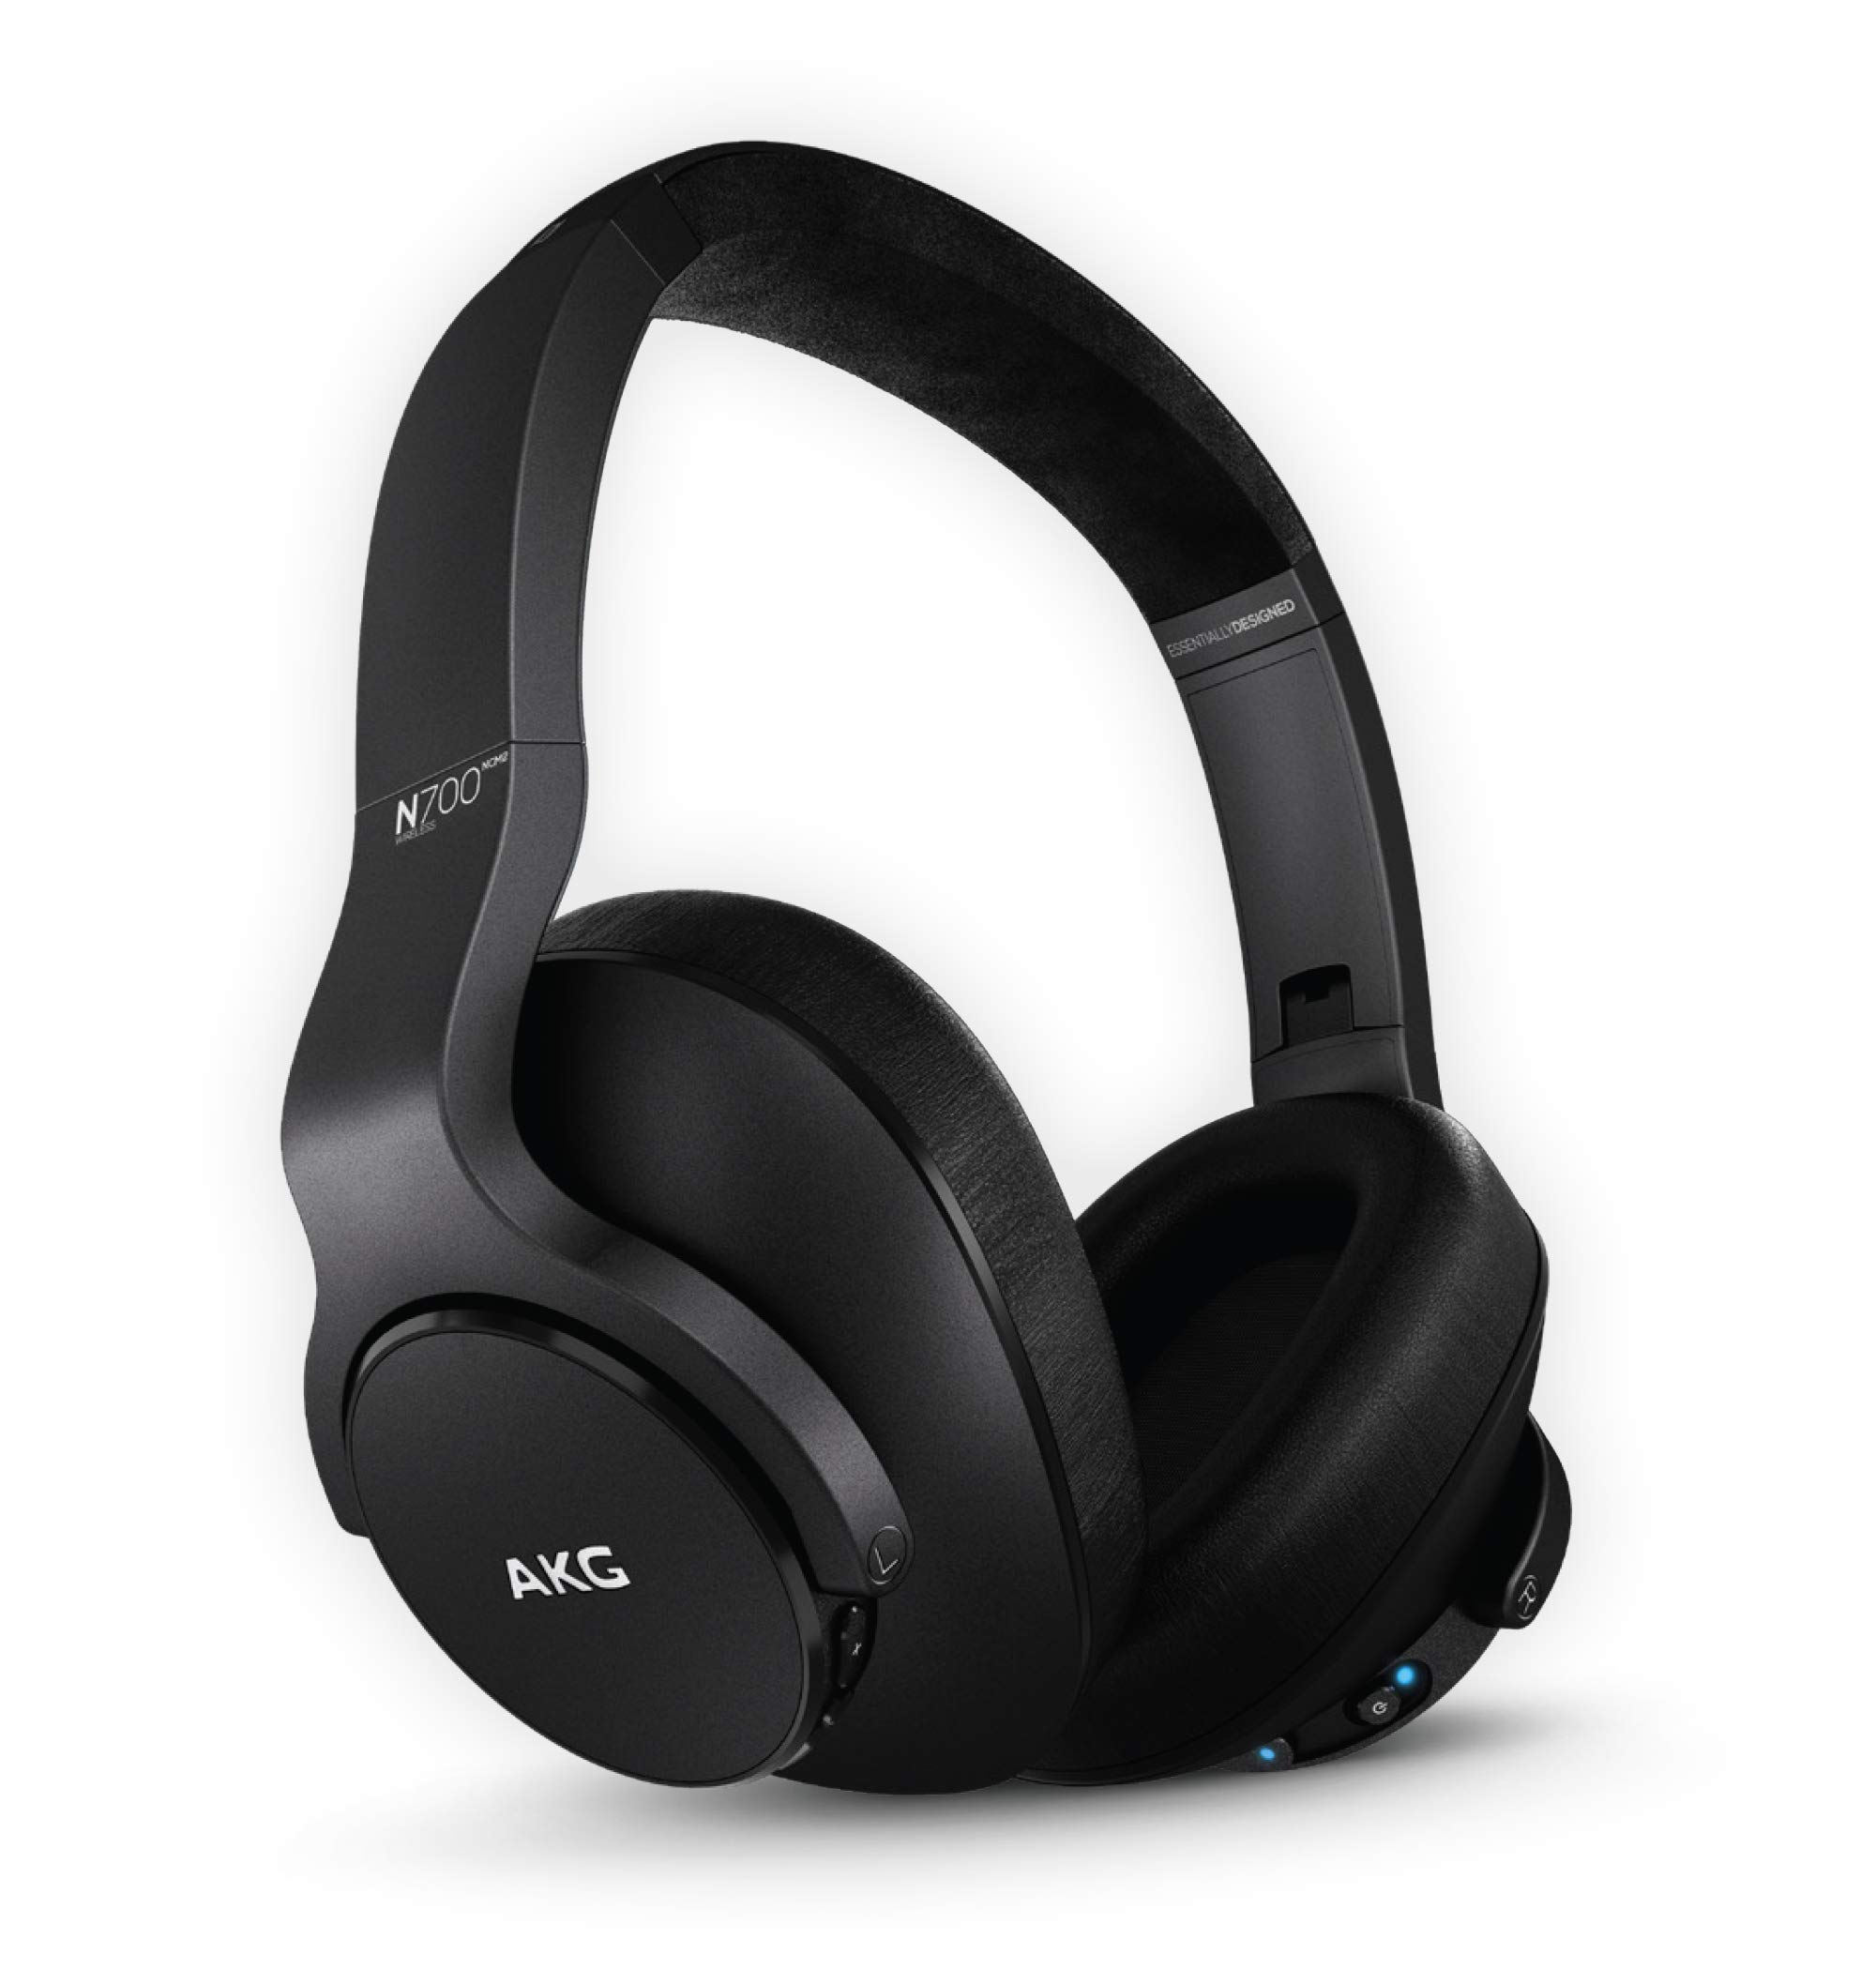 AKG (A Samsung Brand) N700NC M2 Over-Ear Foldable Wireless Headphones, Active Noise Cancelling Headphones - Black (US Version), 2.6